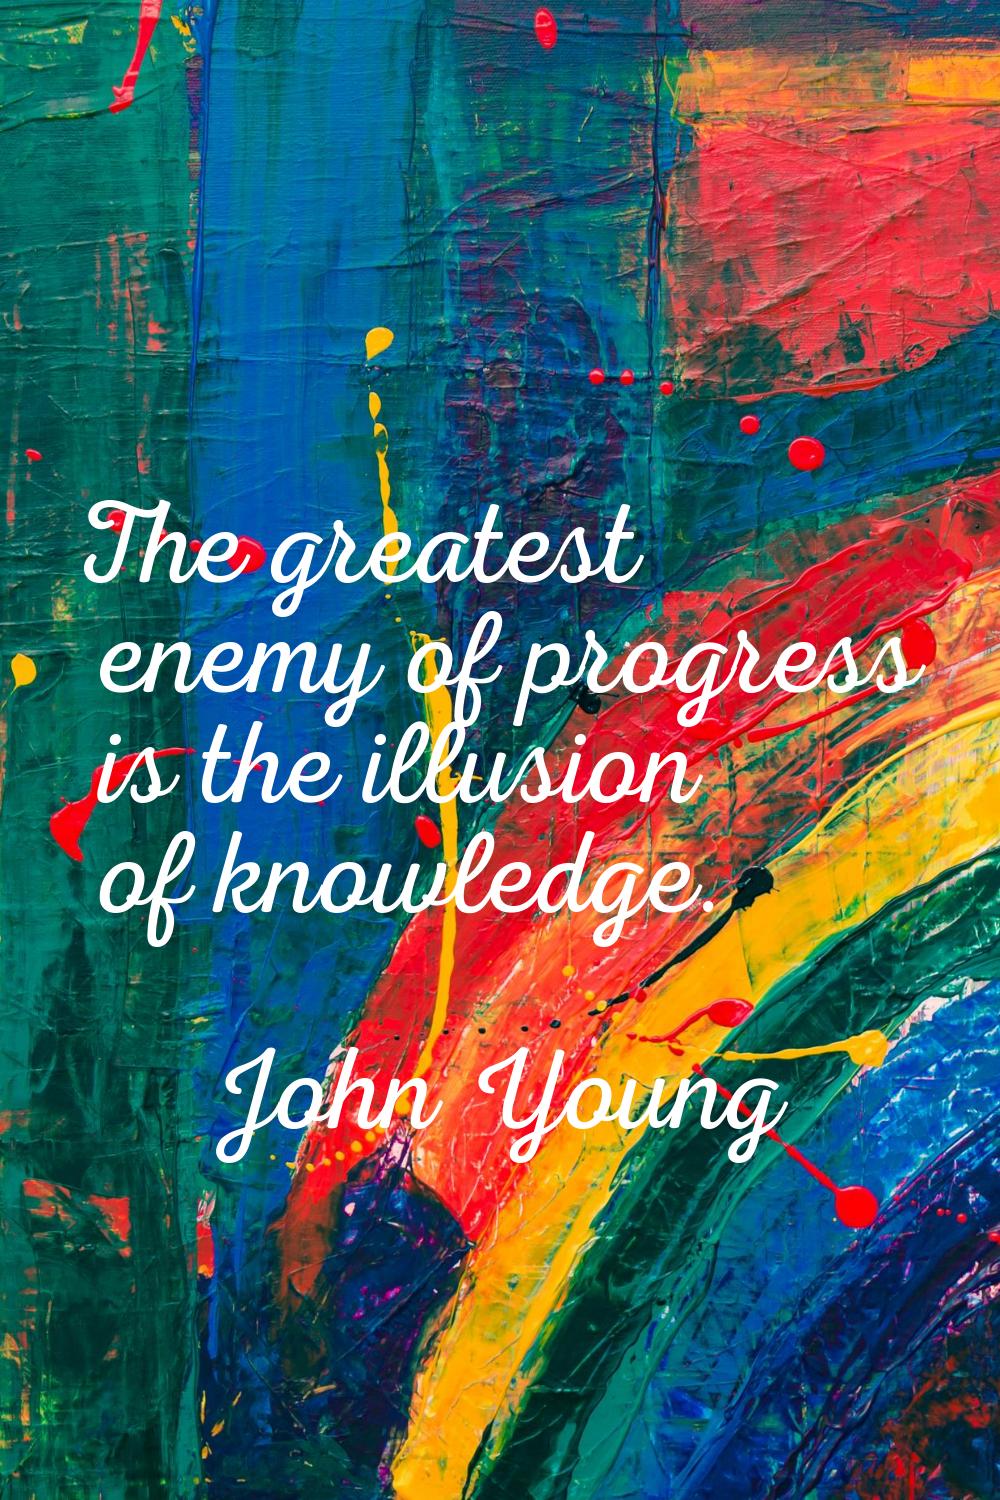 The greatest enemy of progress is the illusion of knowledge.